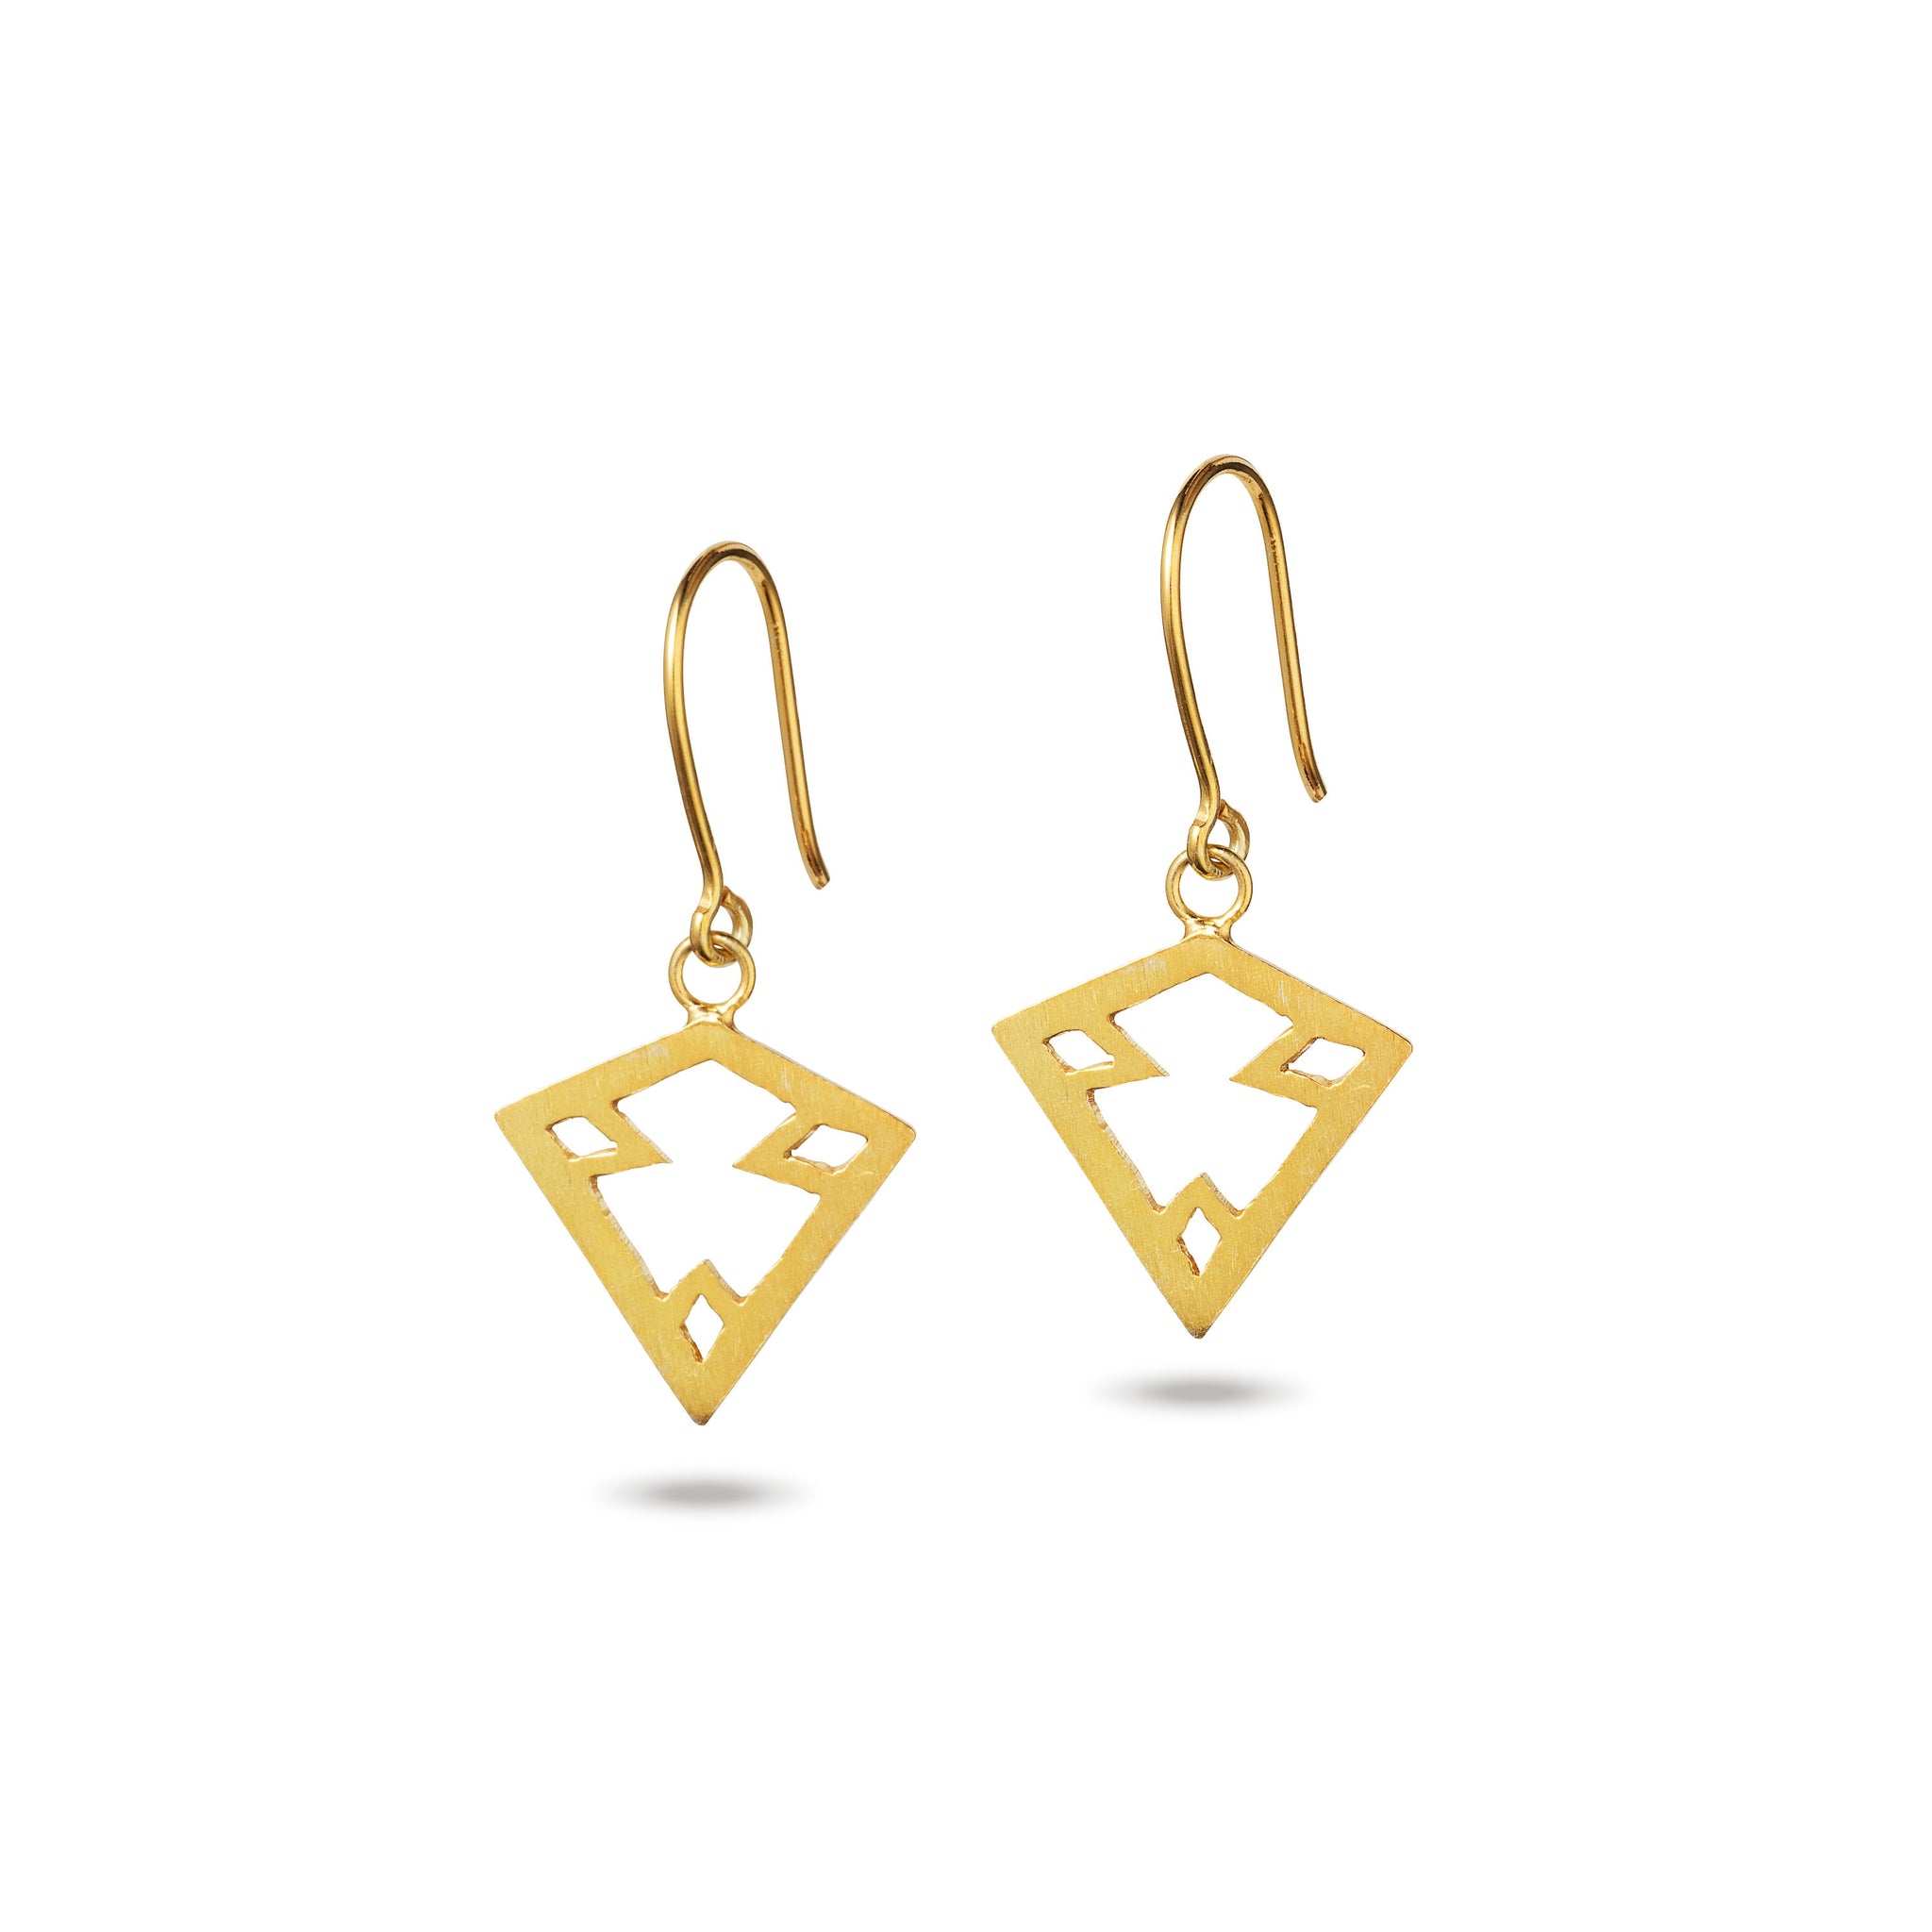 Handmade Afghan Gold Plated Brass Earrings Drop Elegant Inspired Jewelry Geometric Chic Tessellated Abstract Gift for Her